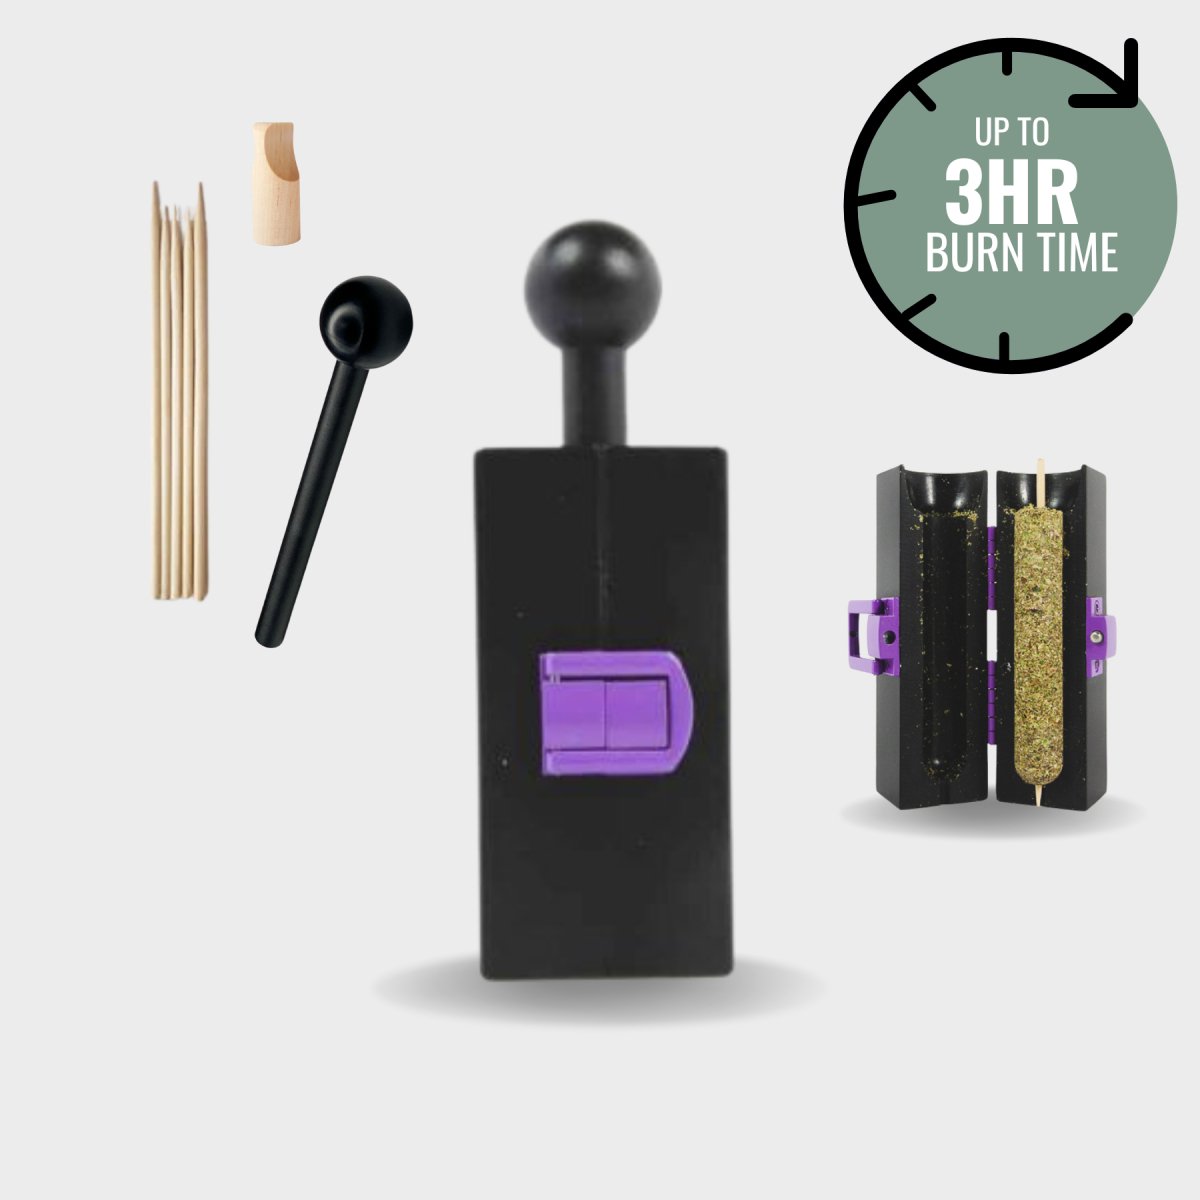 ORIGINAL CANNAMOLD - Buy one - Get 2nd 50% OFF!